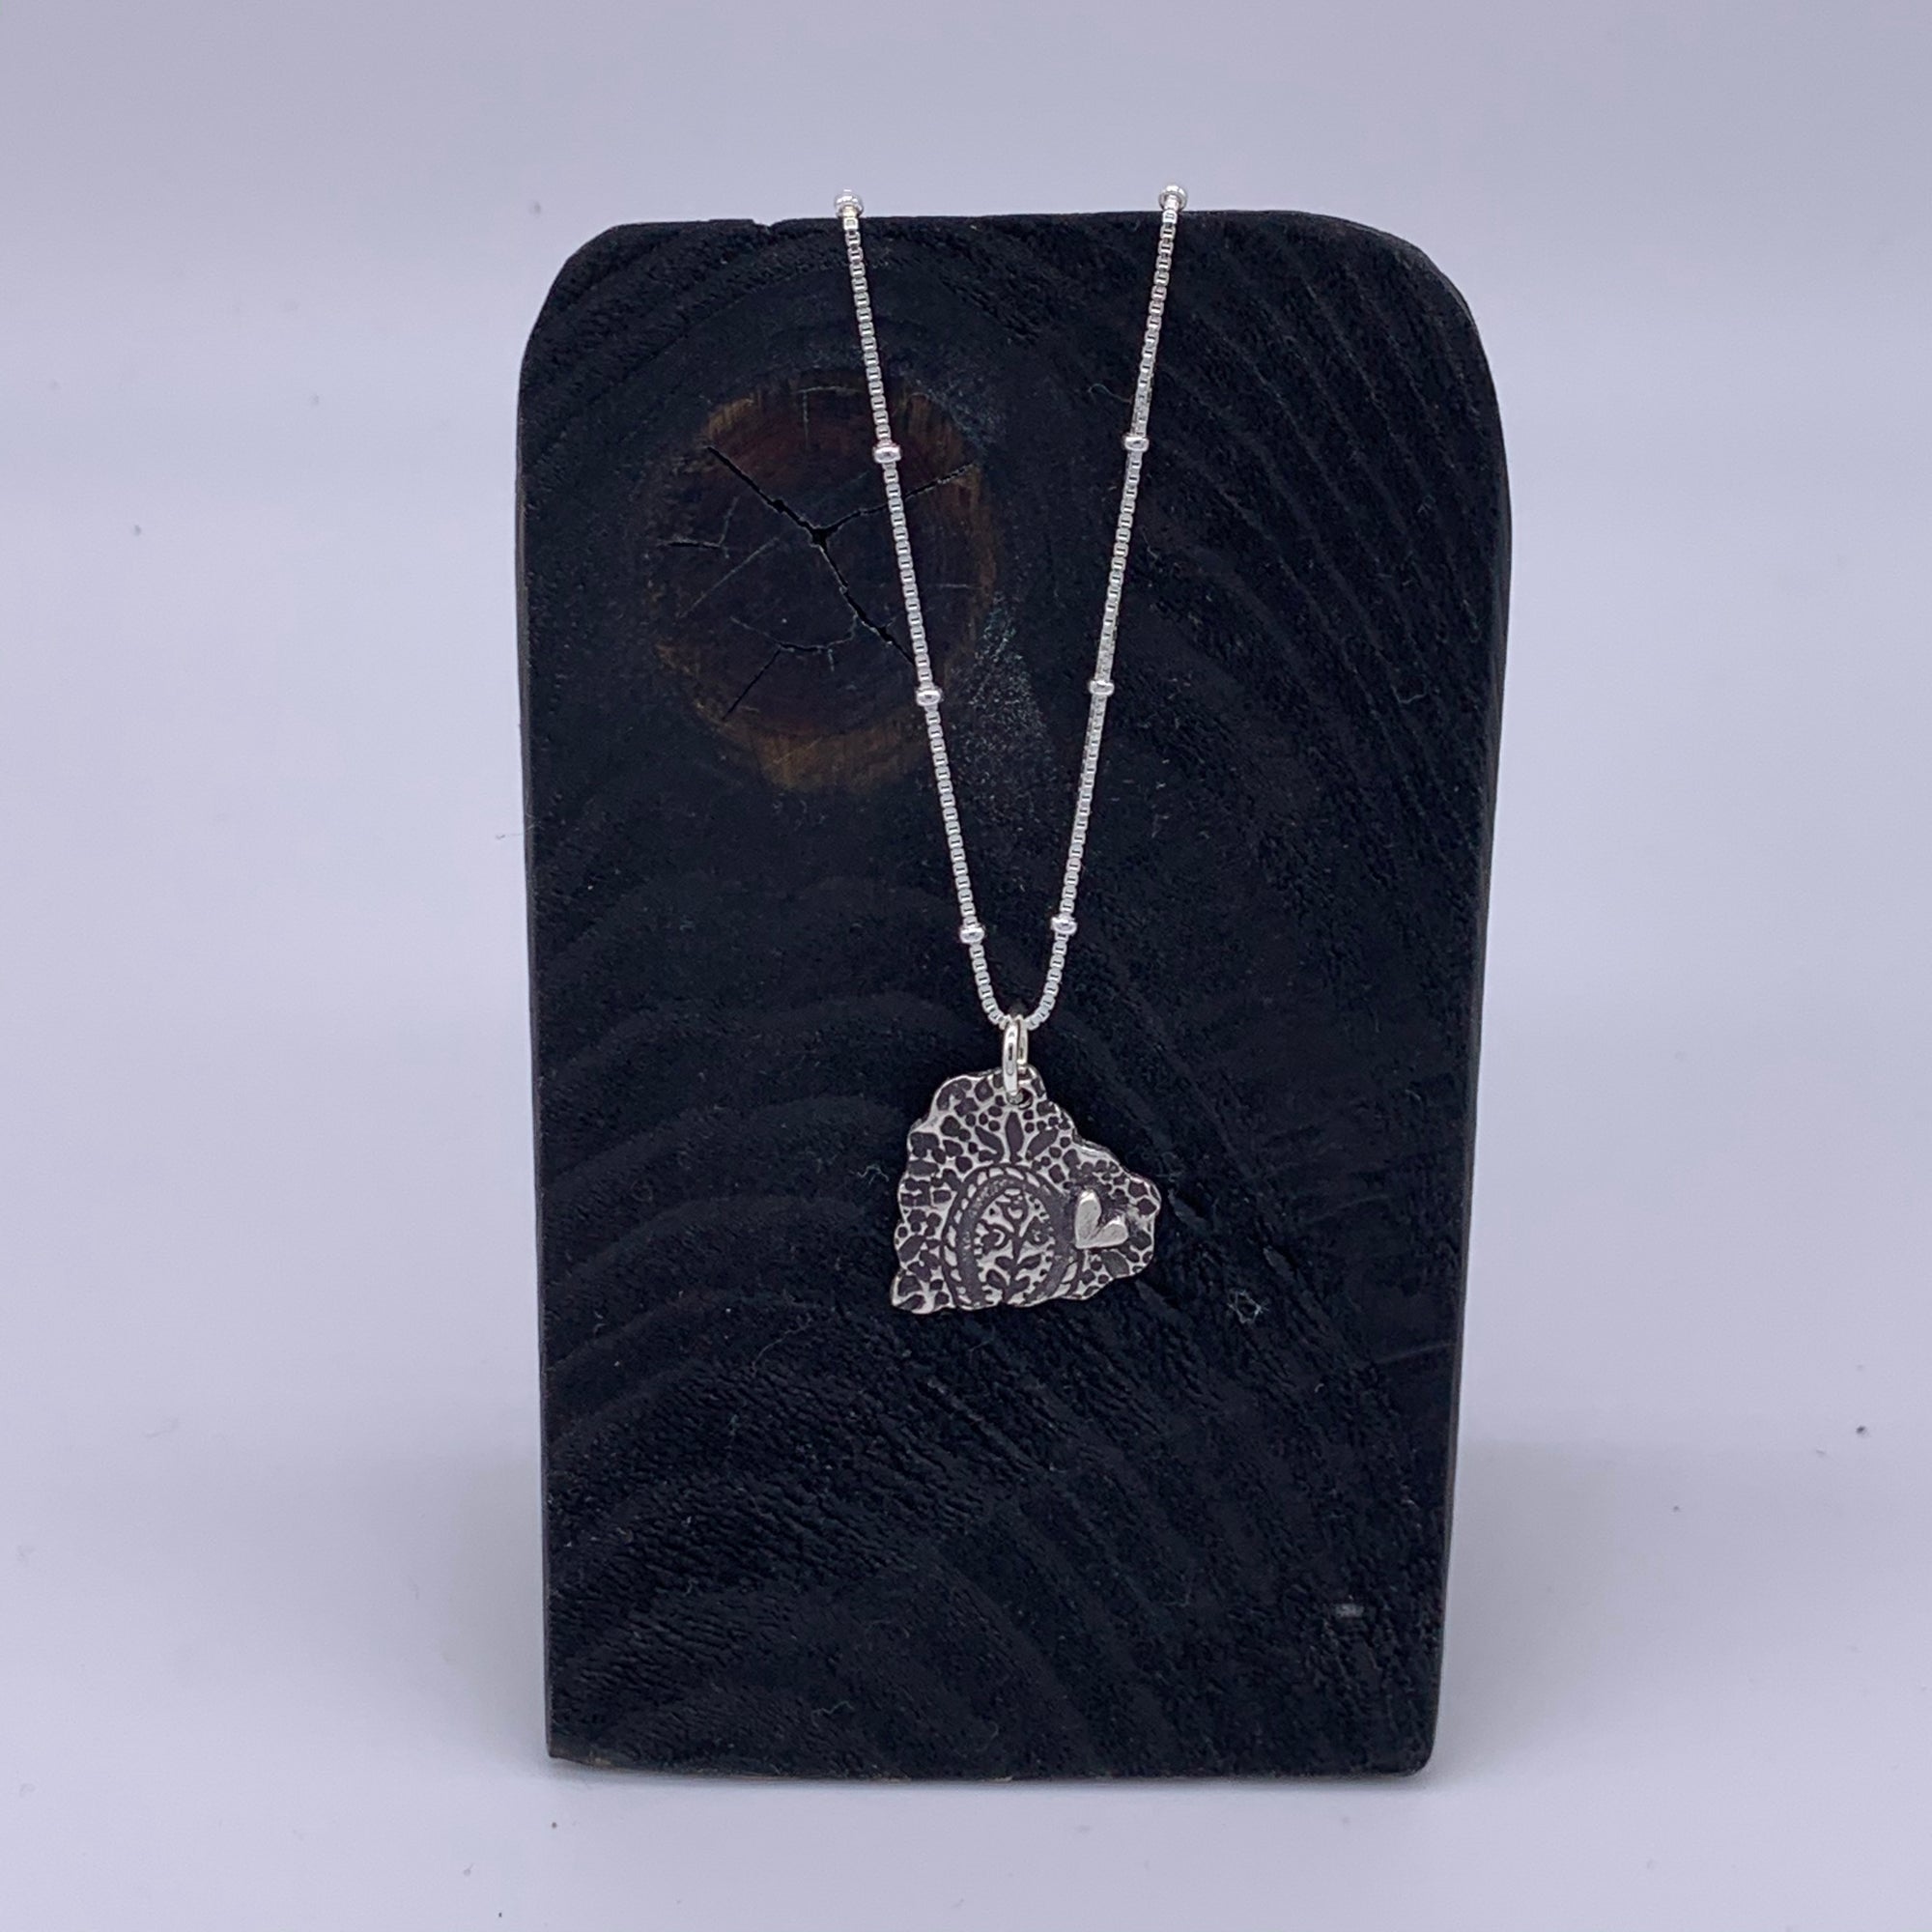 In My Heart Pendant Necklace - Sterling Silver